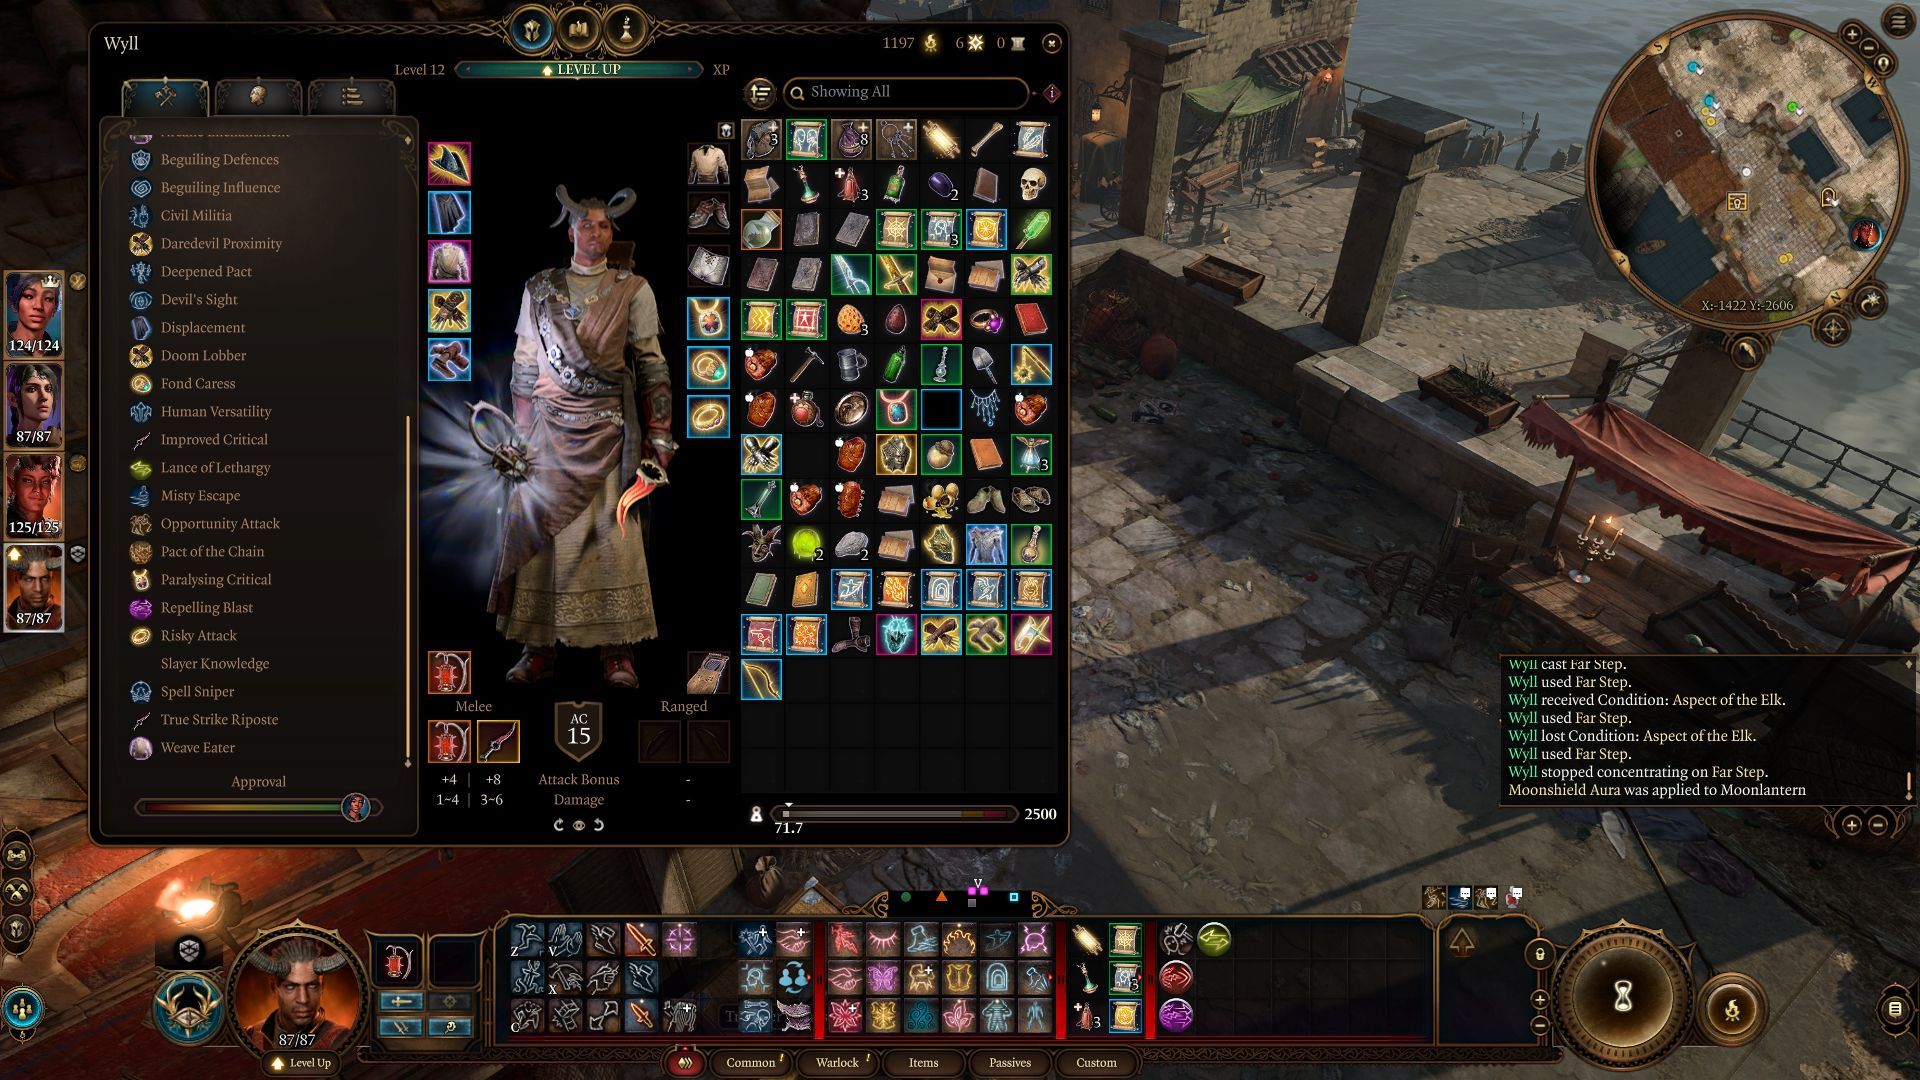 Wyll as a fey warlock in baldur's Gate 3, showing his inventory and equipped items